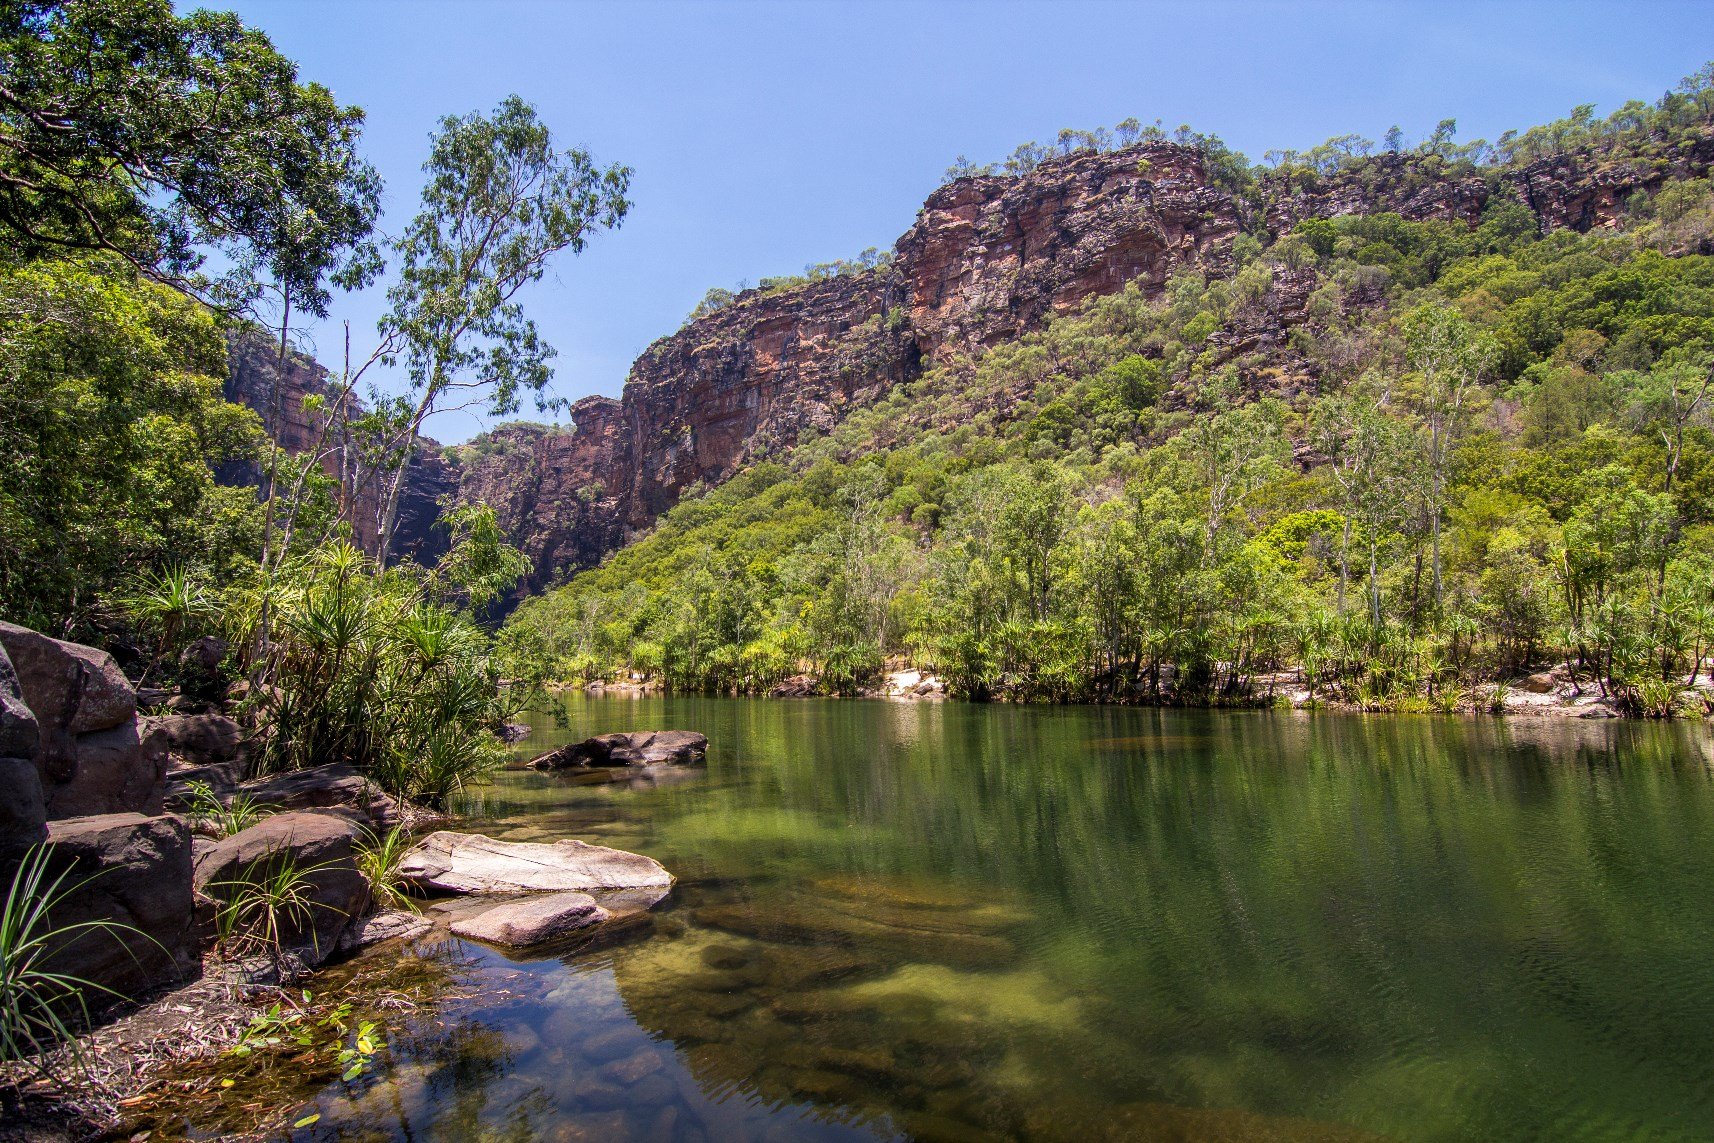 Choosing The Right Guided Tour For Your Kakadu Adventure